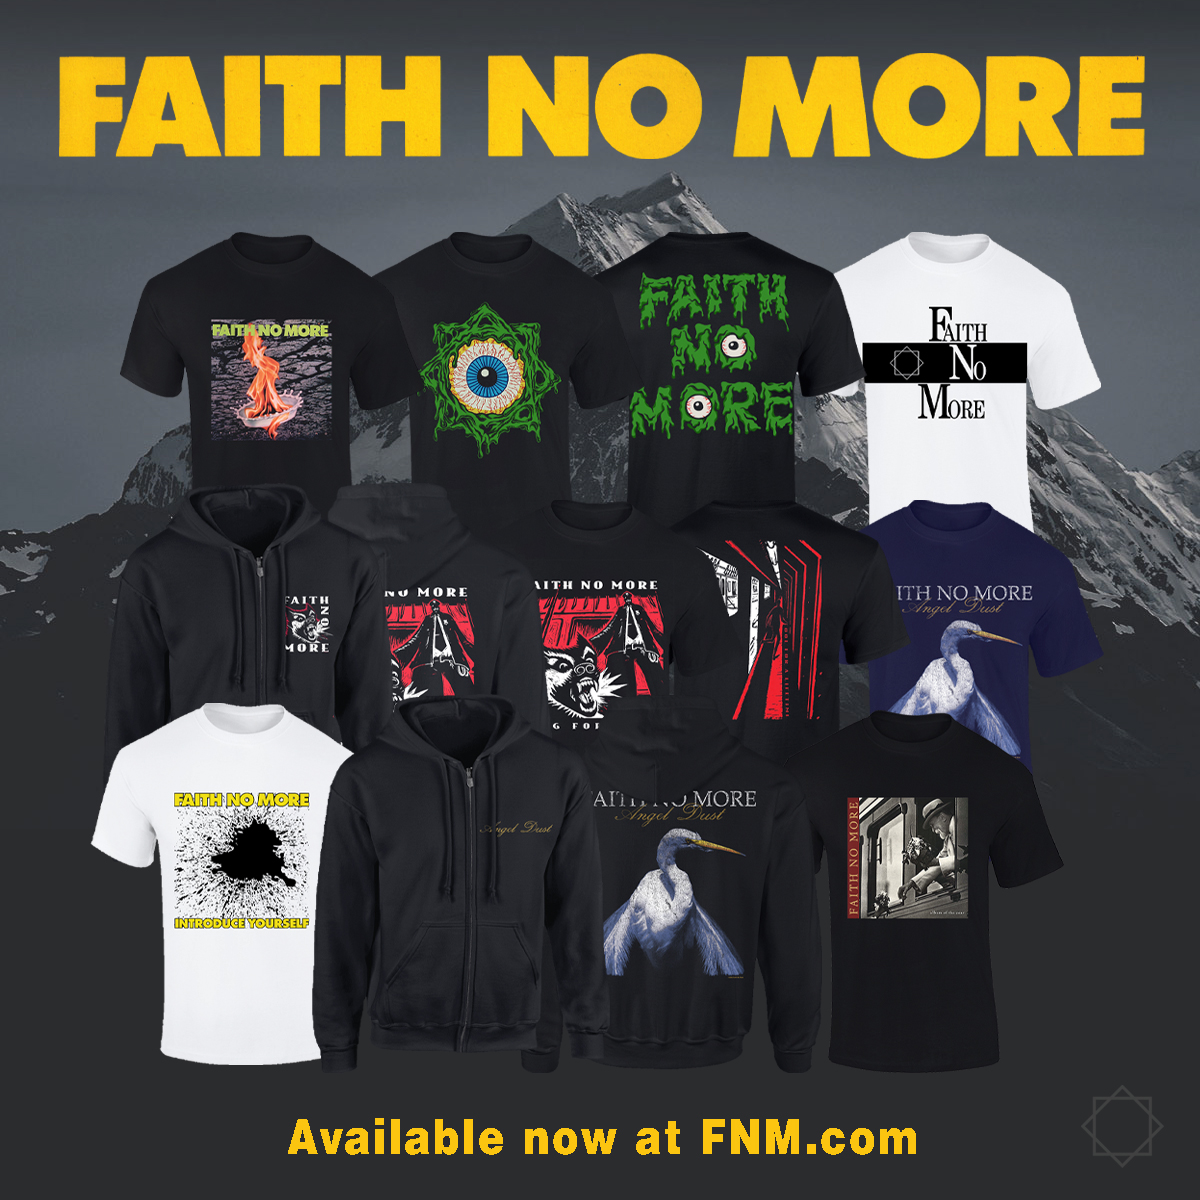 We've pulled some classics out of the closet for you. Get The Real Thing from the FNM website. Link in Bio.